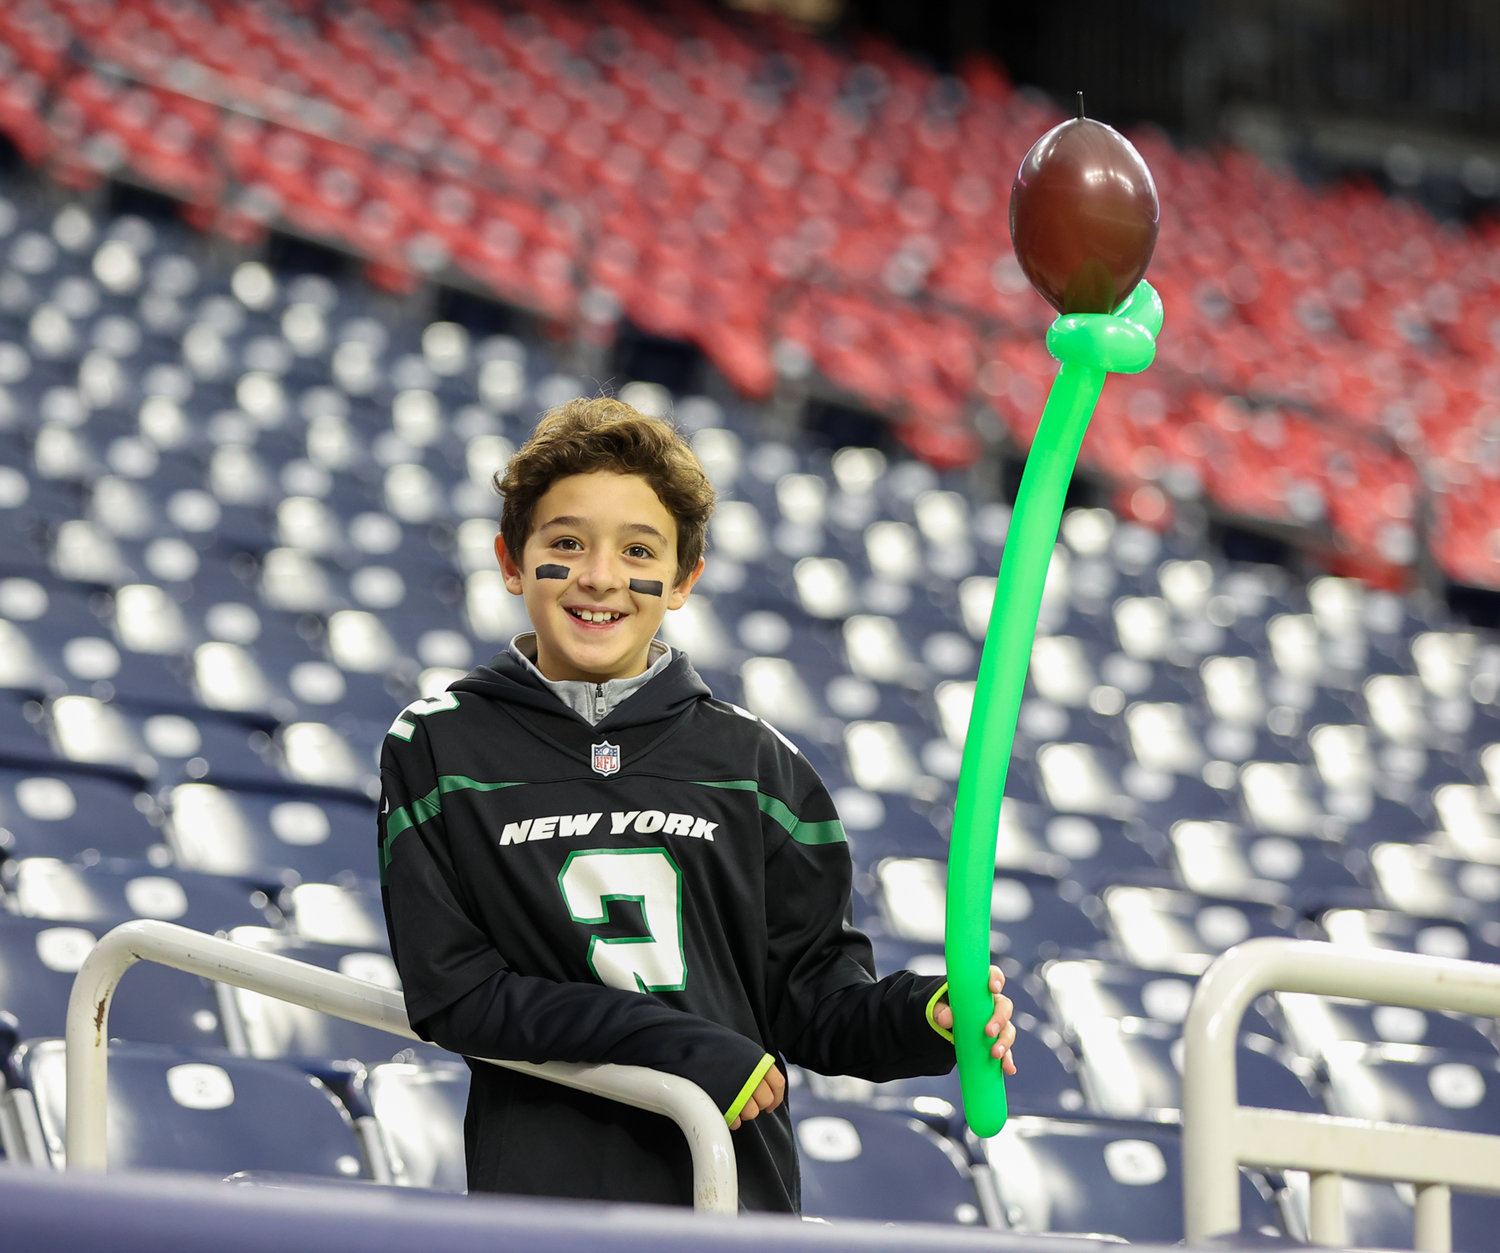 A young New York Jets fan arrives early for an NFL game between the Houston Texans and the New York Jets on November 28, 2021 in Houston, Texas.